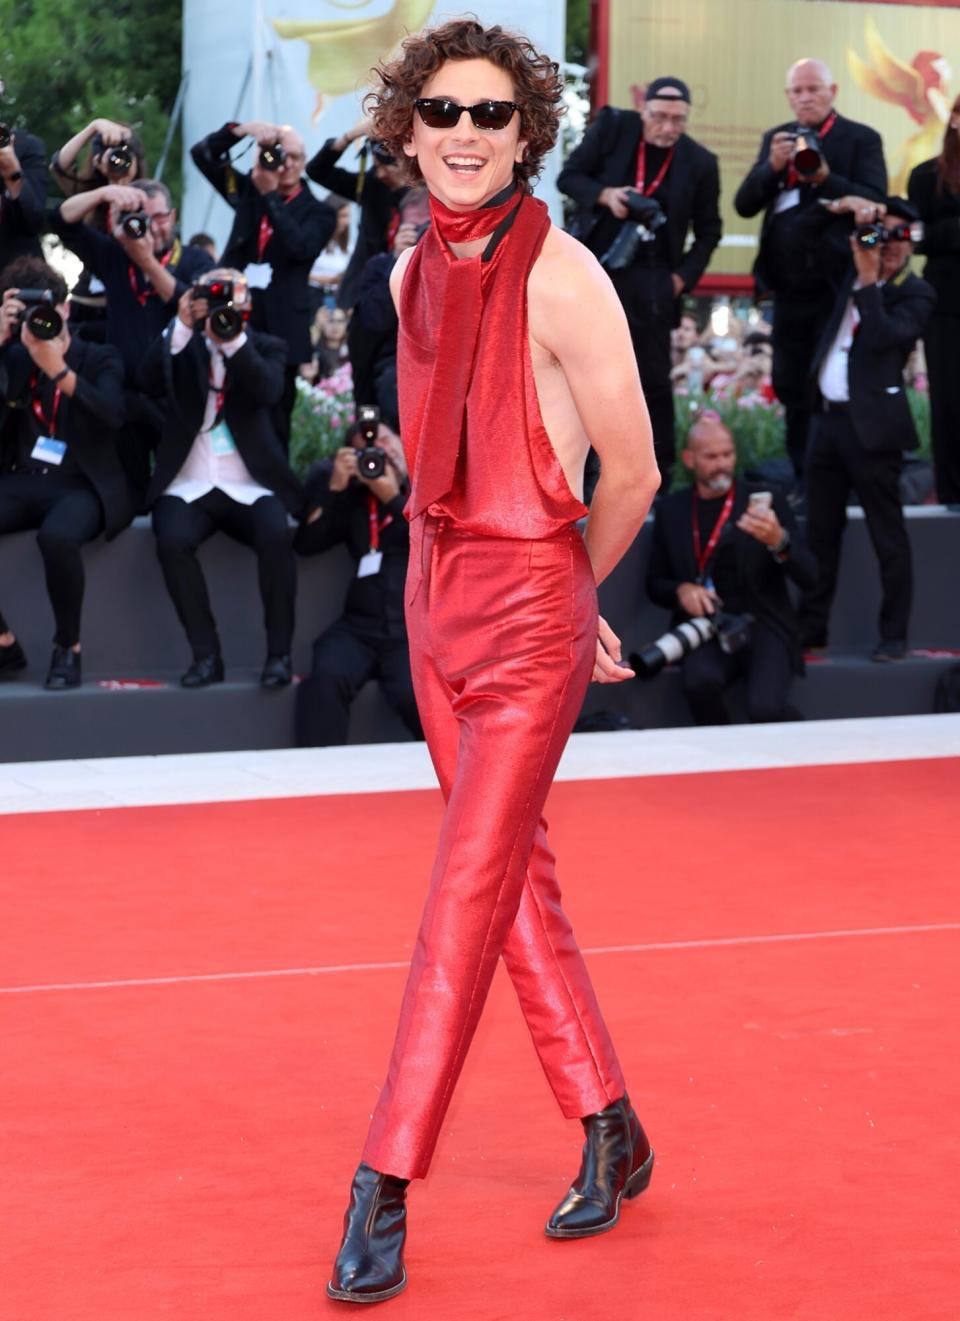 Timothee Chalamet attends the "Bones And All" red carpet at the 79th Venice International Film Festival